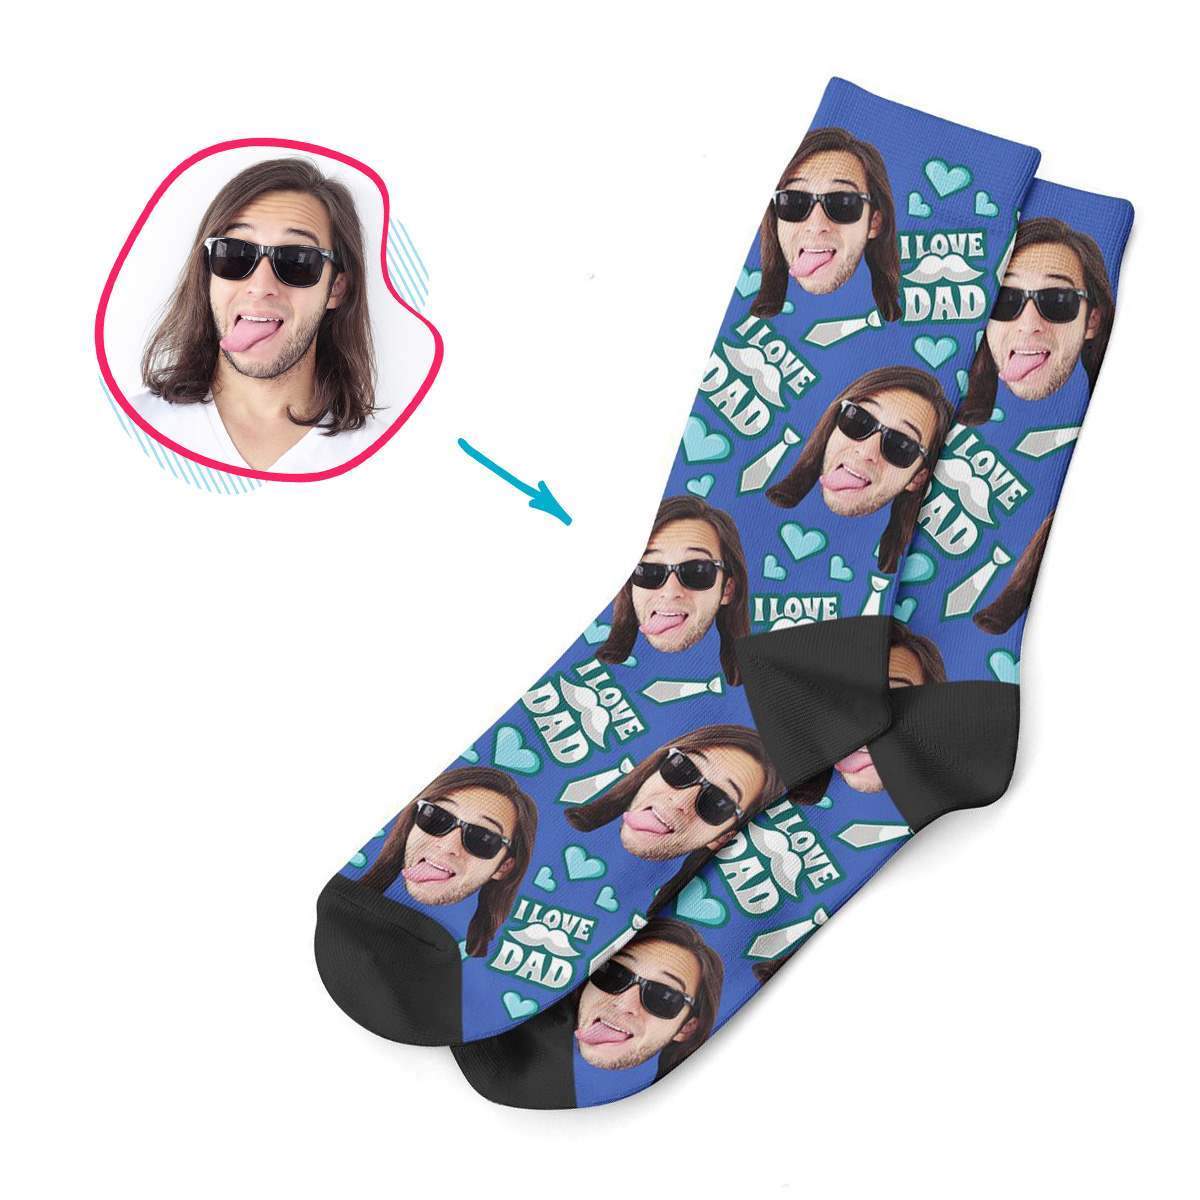 darkblue Love Dad socks personalized with photo of face printed on them